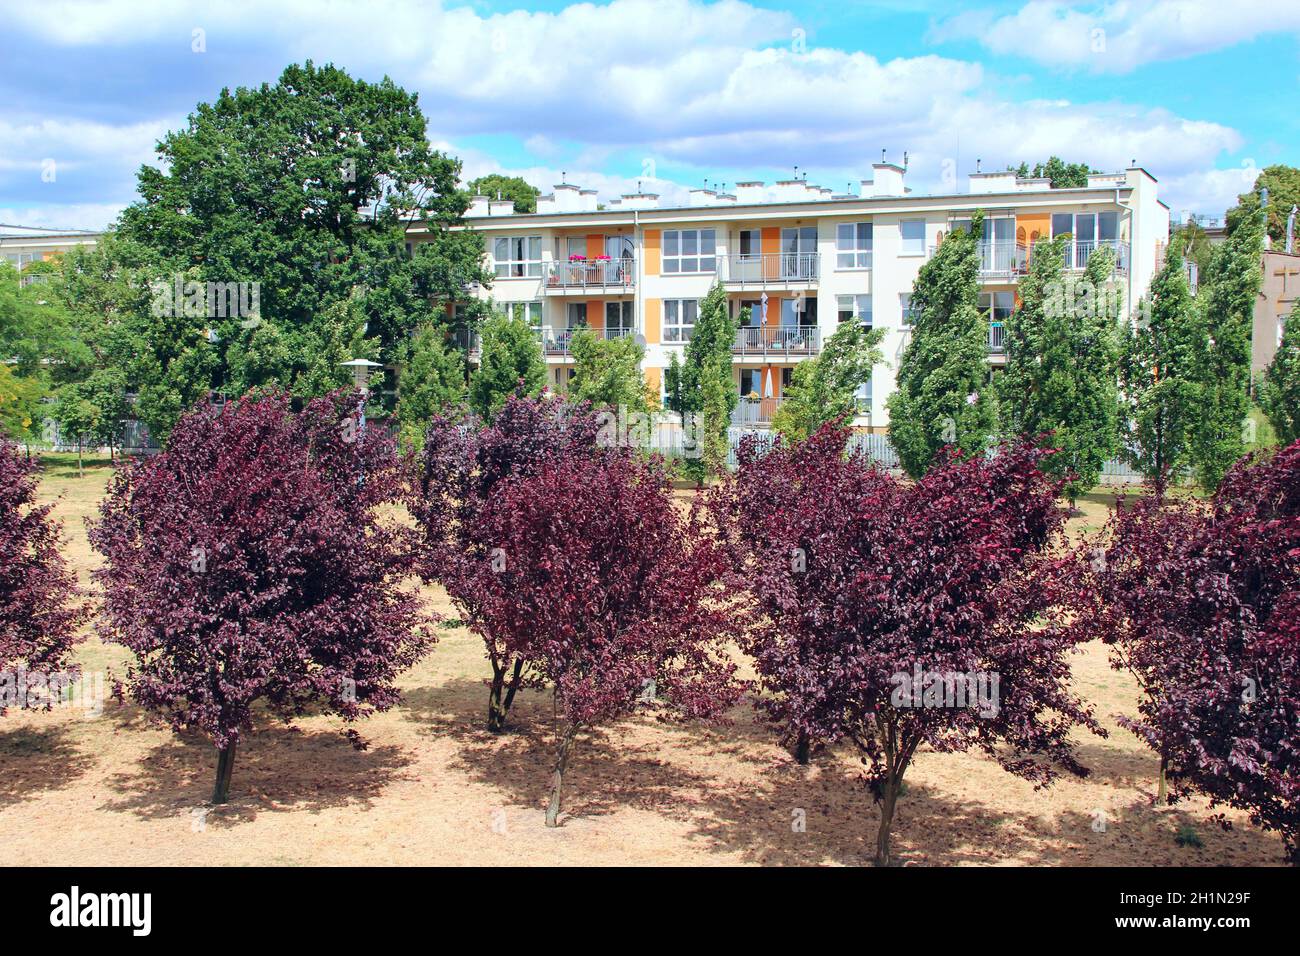 Tree with black and purple coloring growing in city garden. Prunus cerasifera with dark red foliage. Branches of bird cherry tree with dark leaves. Pr Stock Photo